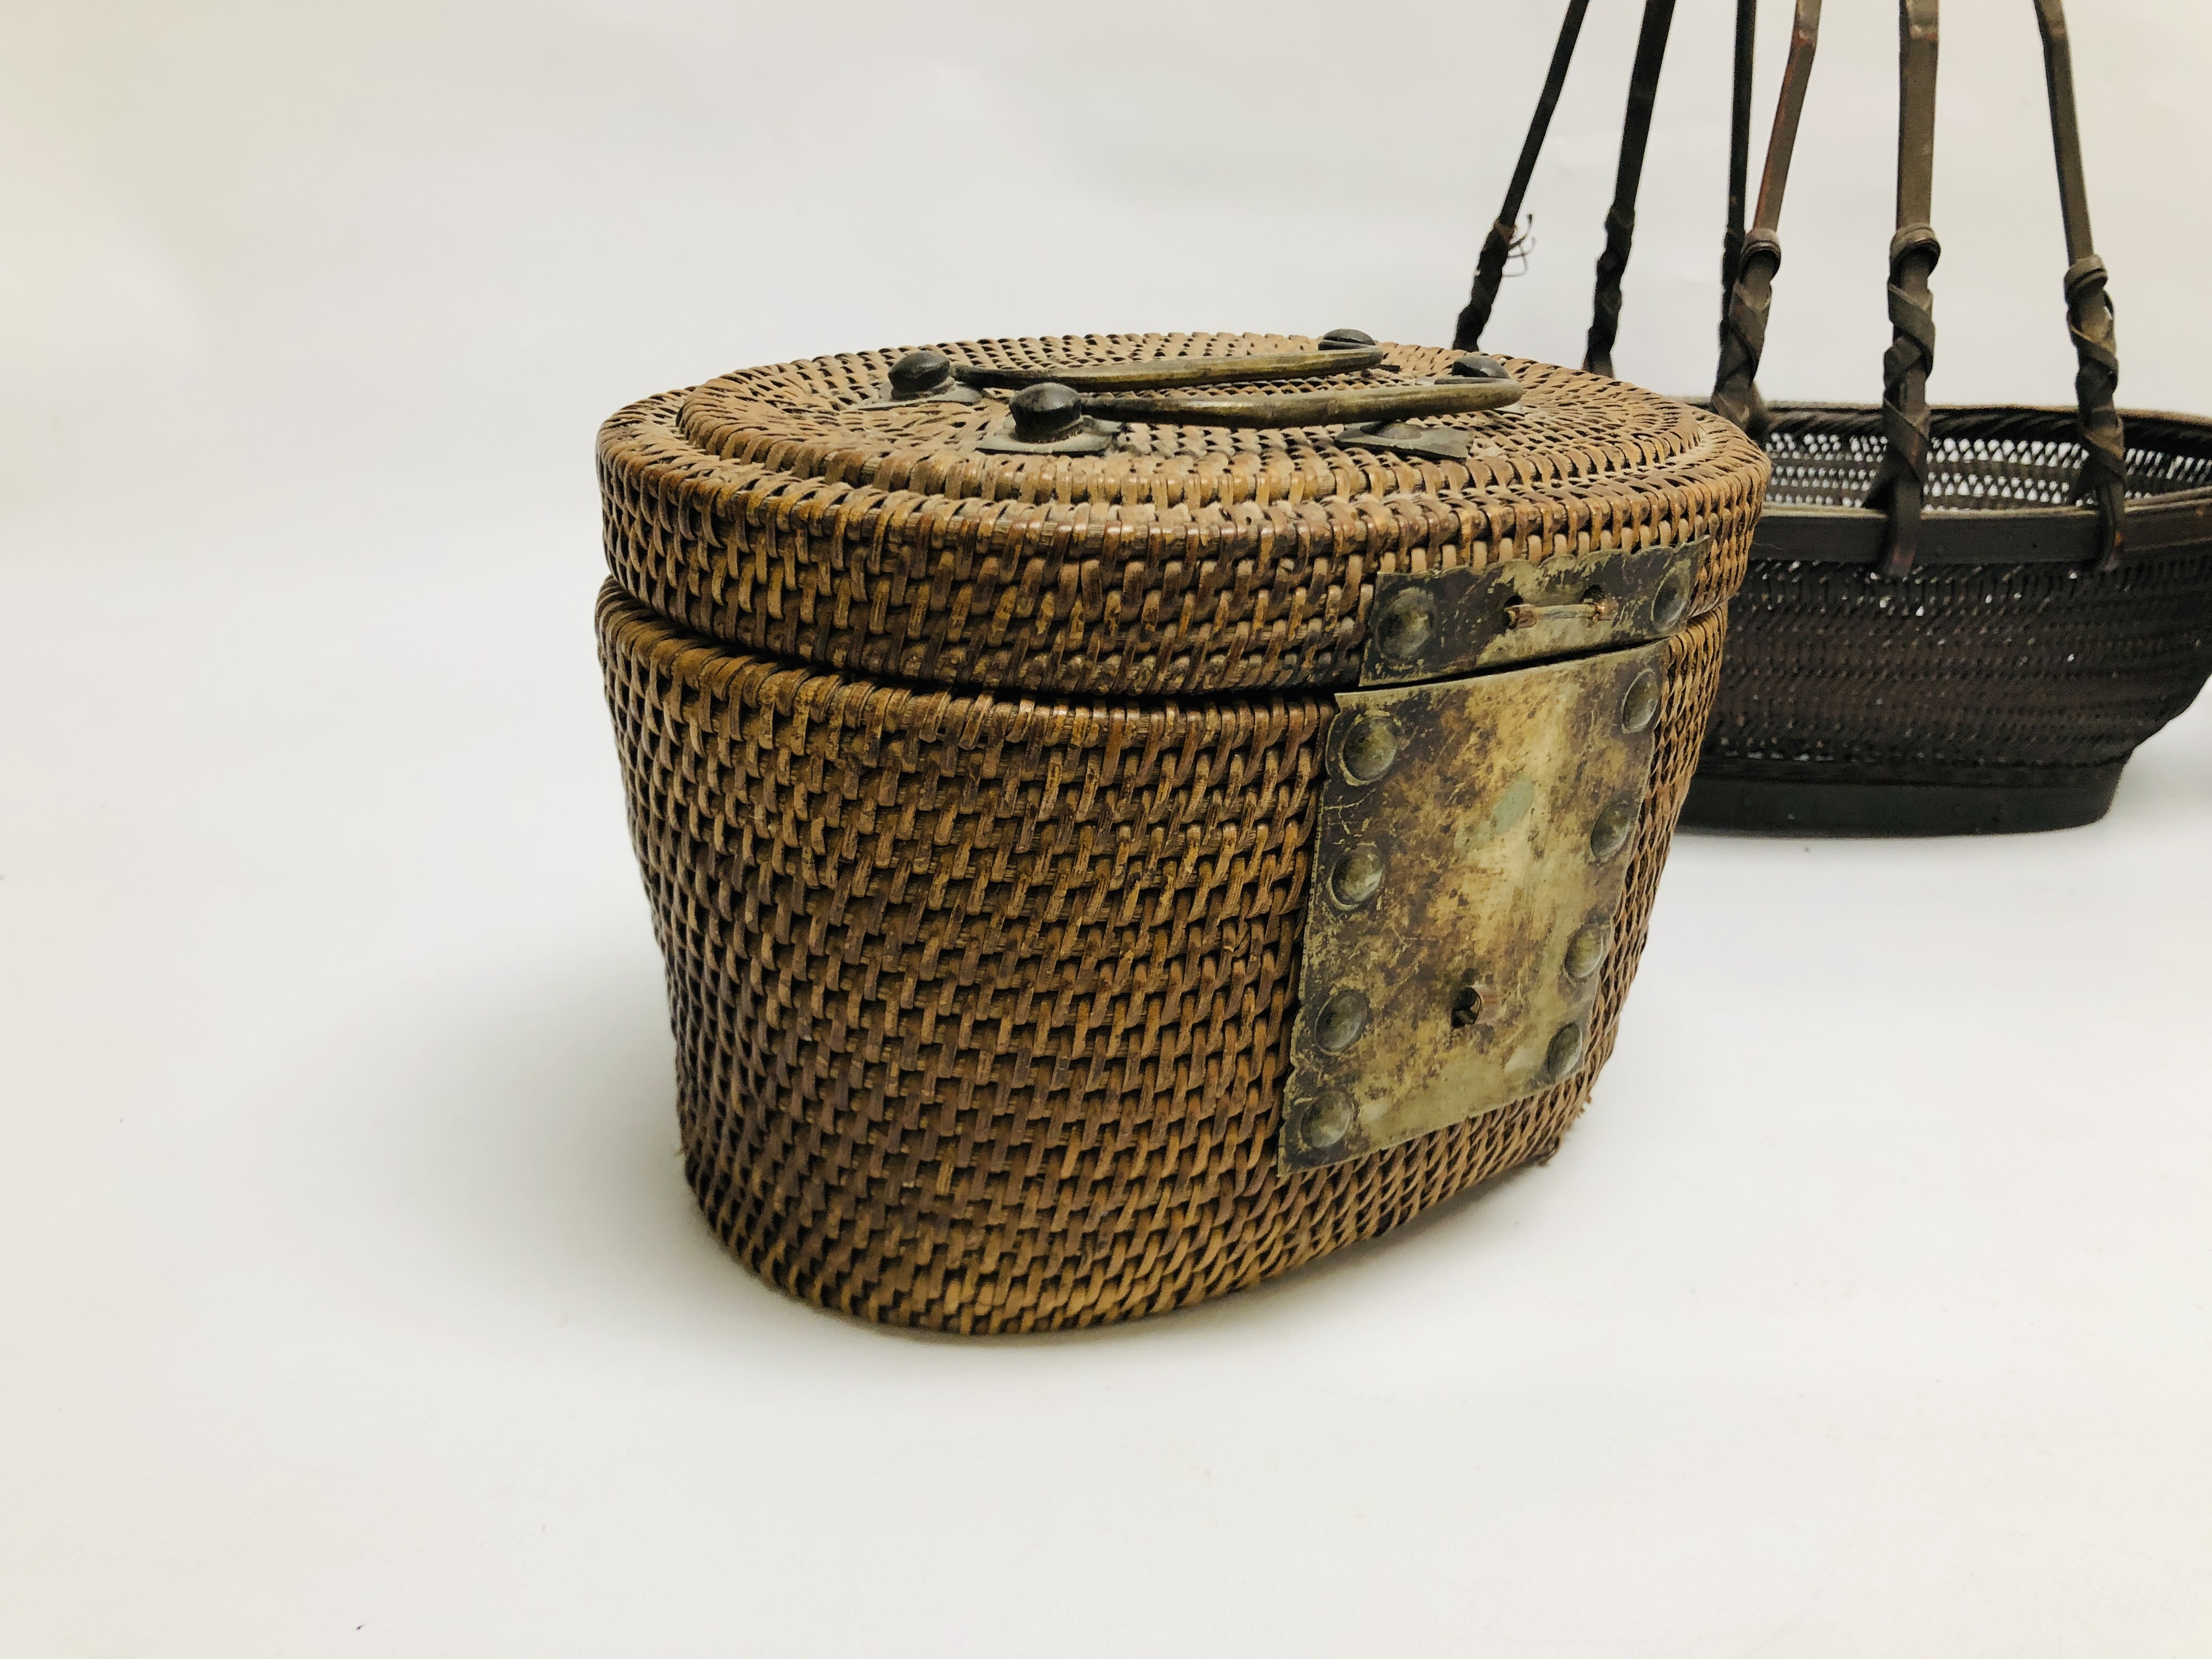 A VINTAGE WOVEN BAMBOO BASKET ALONG WITH A WOVEN WICKER TEA BASKET, METAL WORK HANDLES, - Image 6 of 9